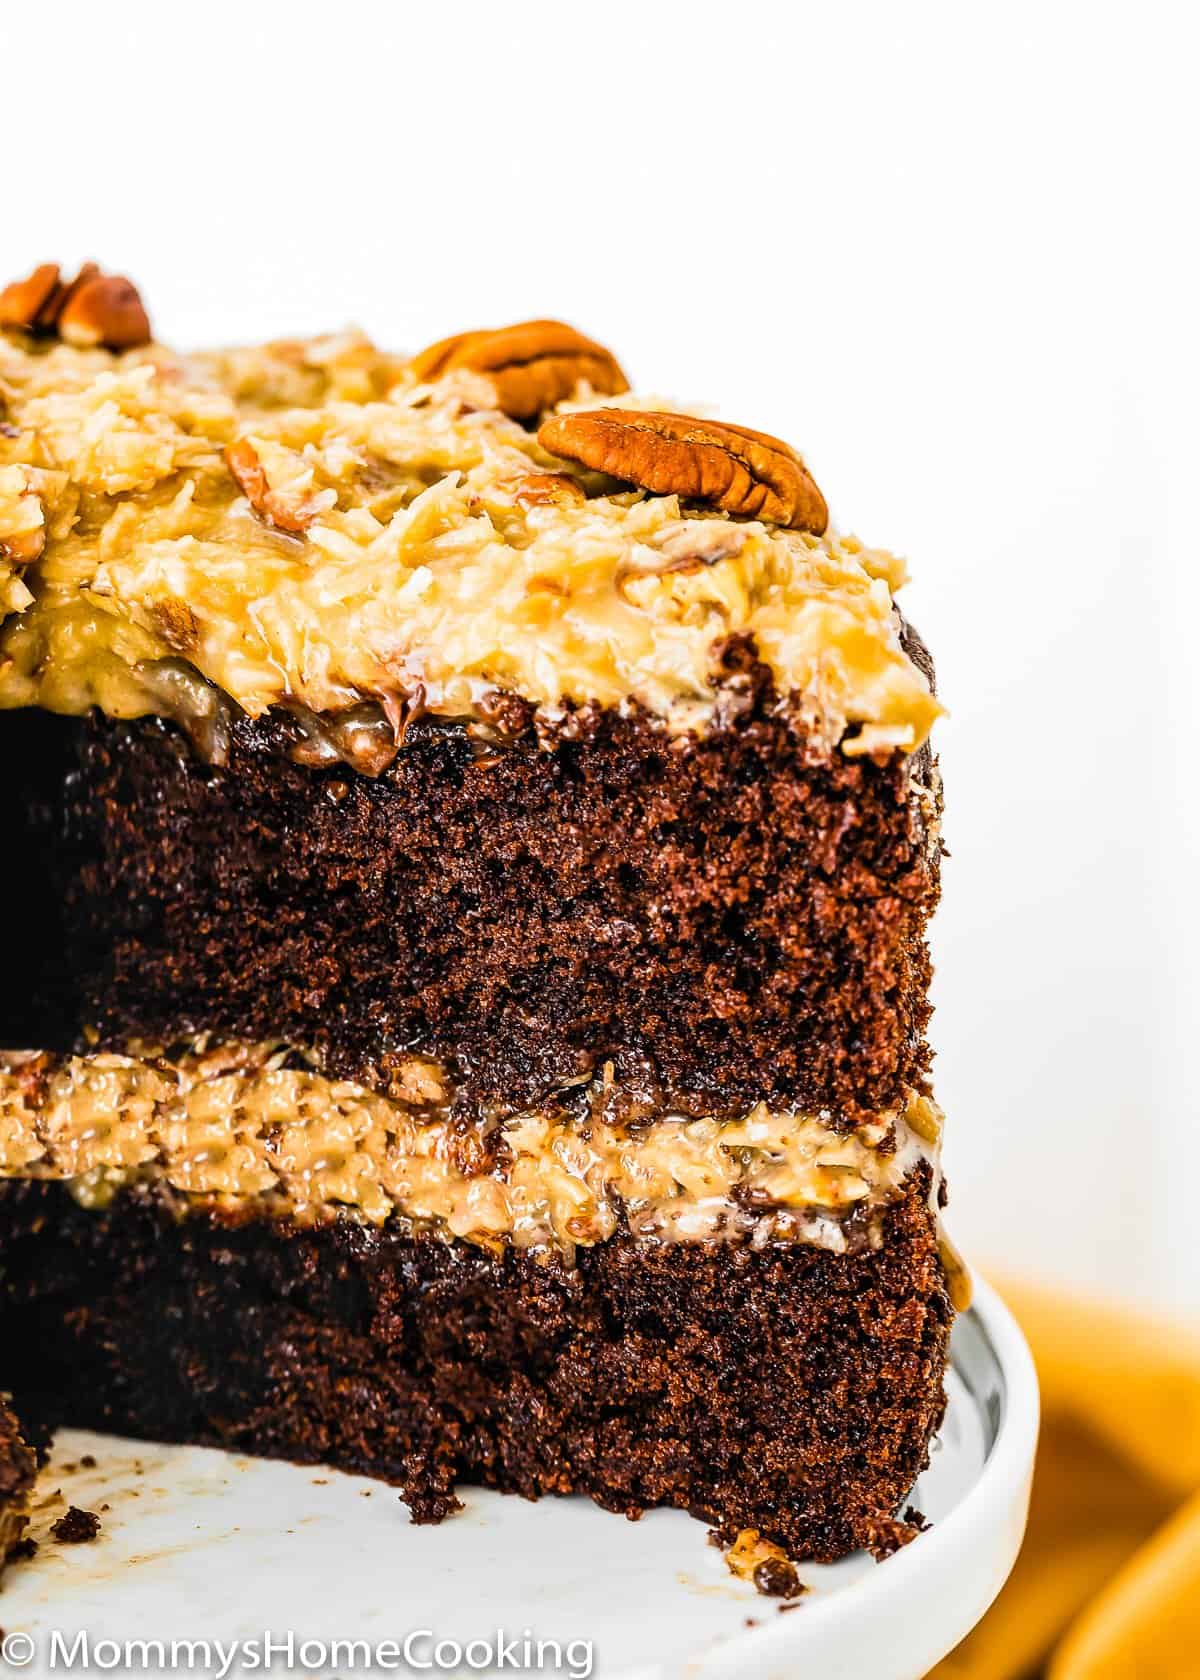 sliced Eggless German Chocolate Cake showing fluffy inside texture